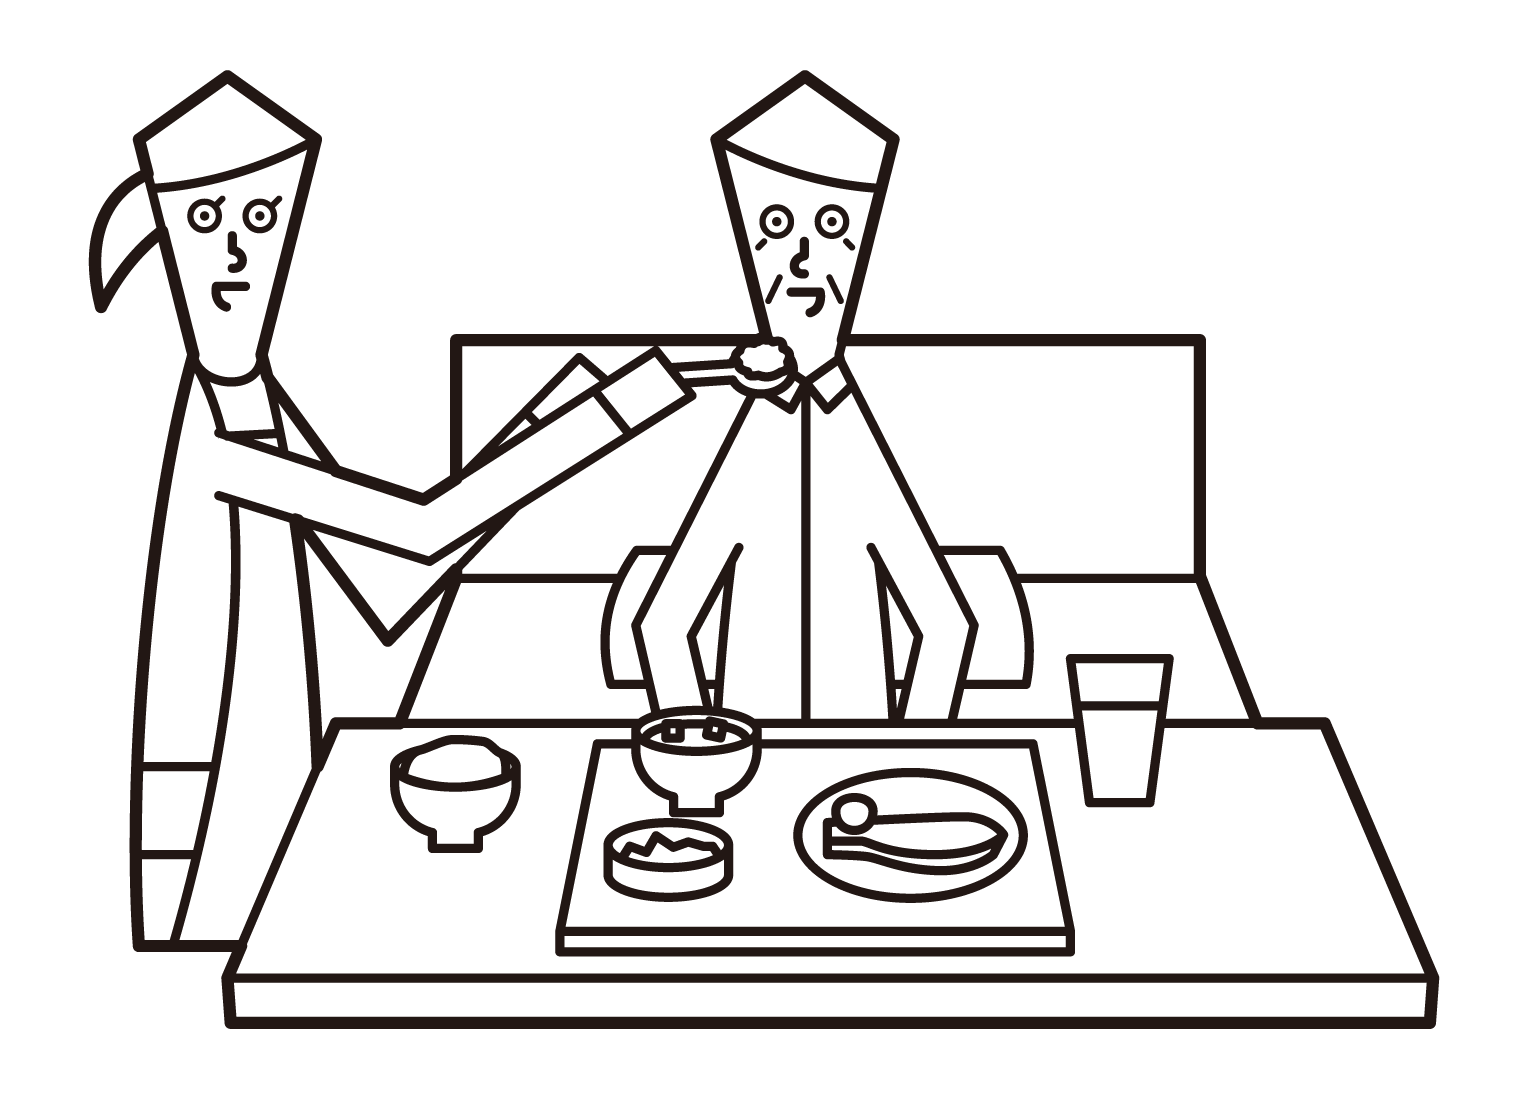 Illustration of an elderly man (male) receiving meal assistance